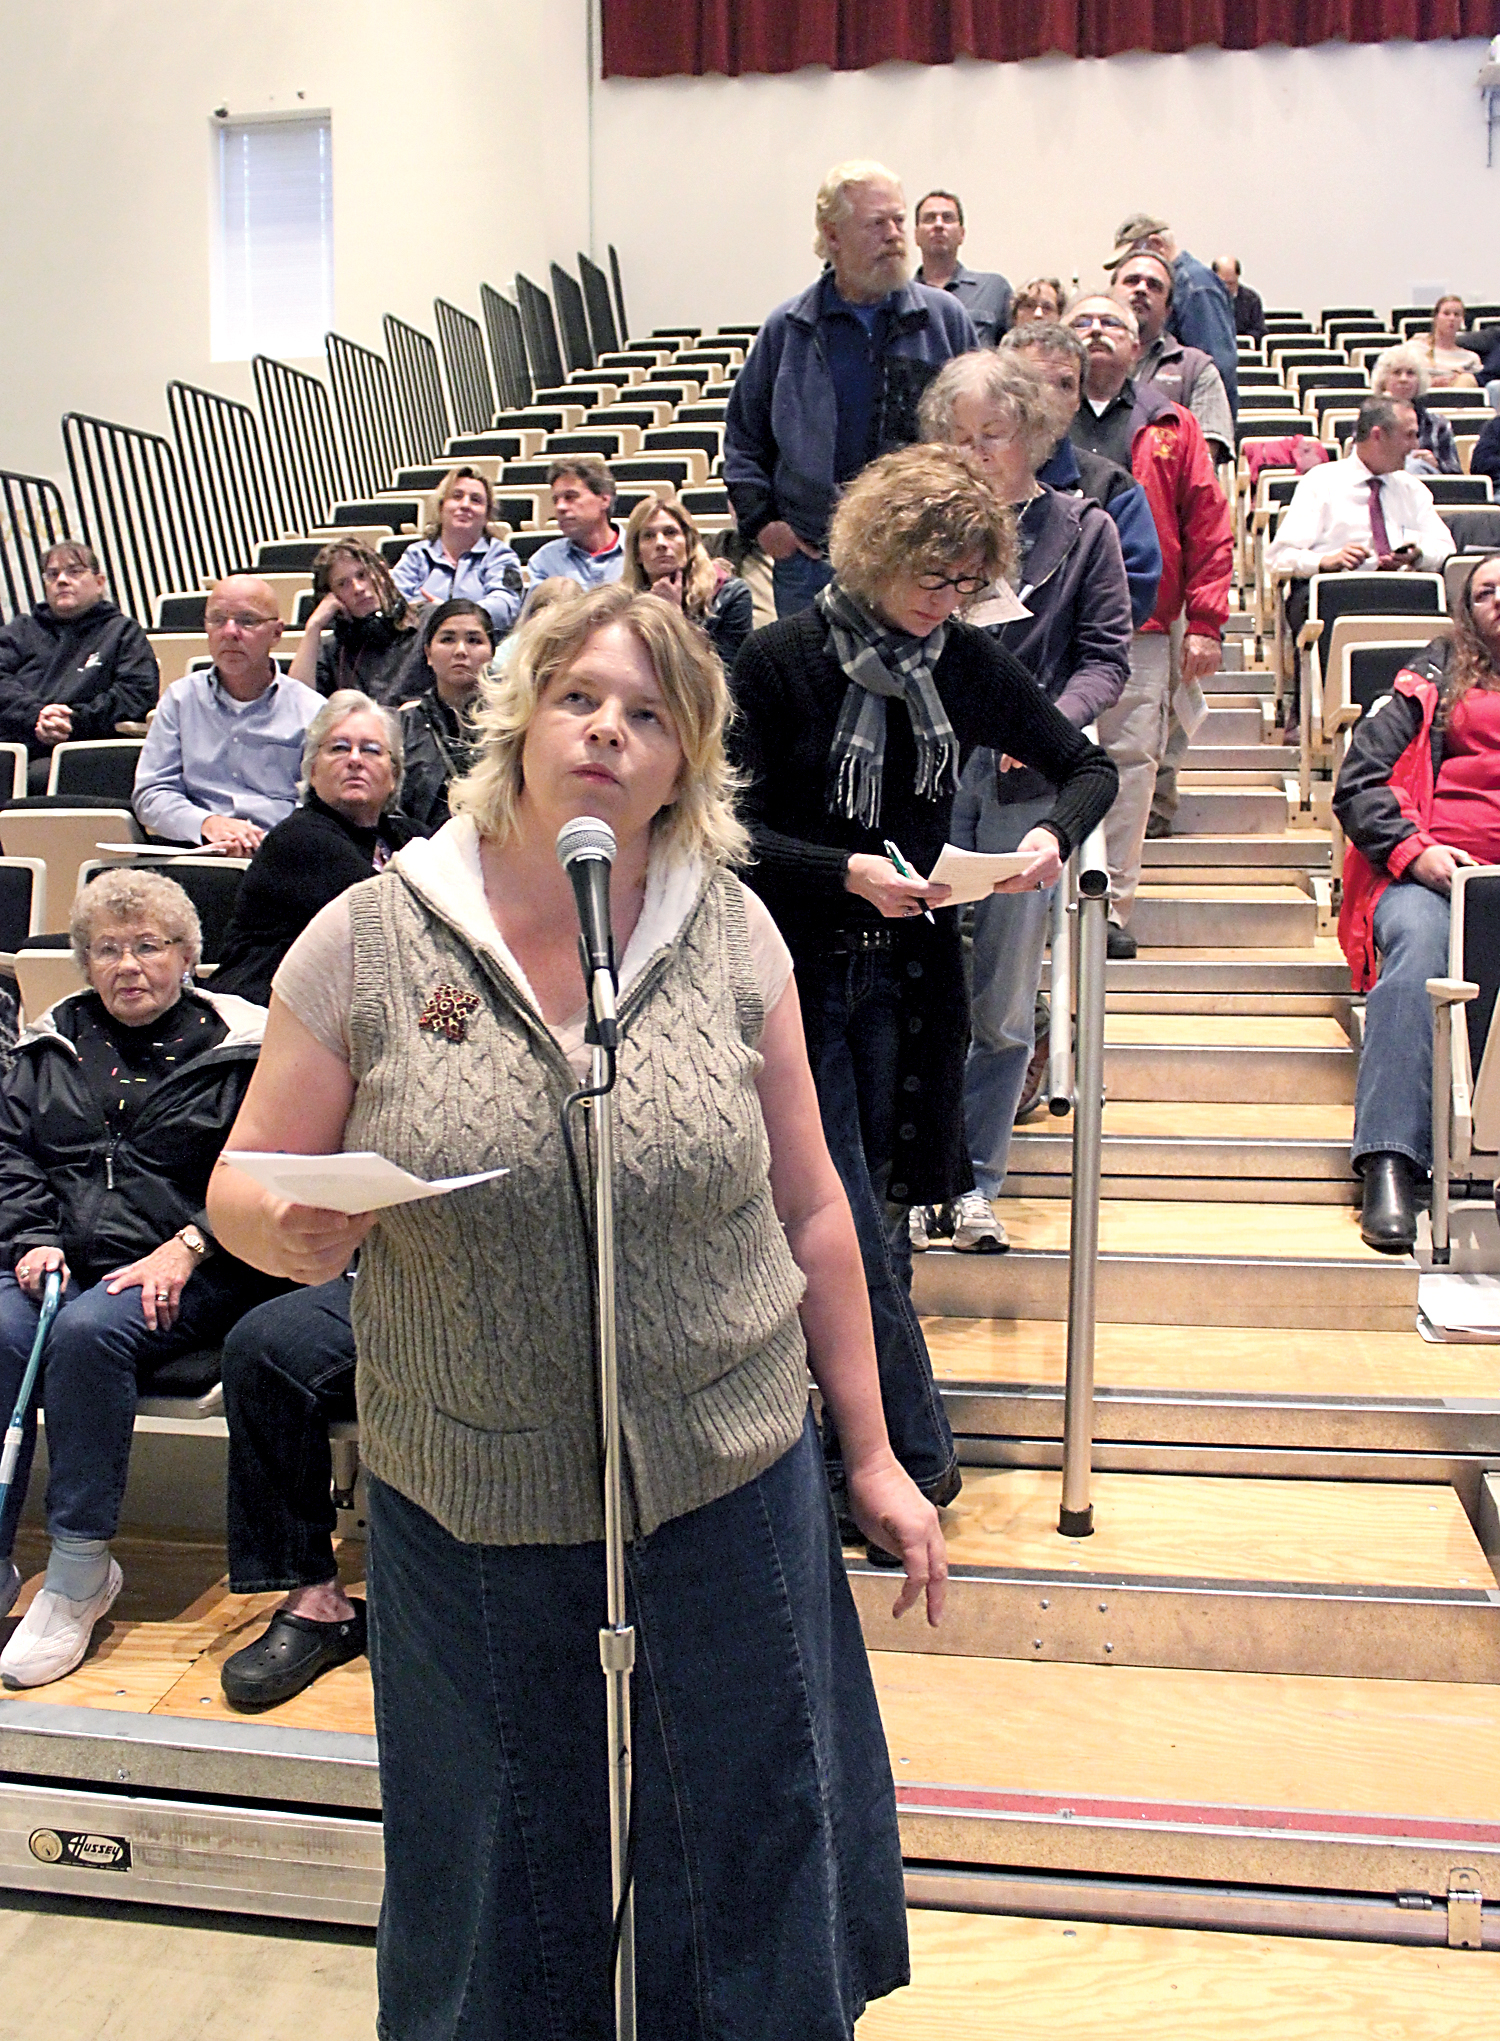 Forks resident Michelle Simpson is the first to ask questions of the panel at the meeting. Mark St.J. Couhig/Peninsula Daily News